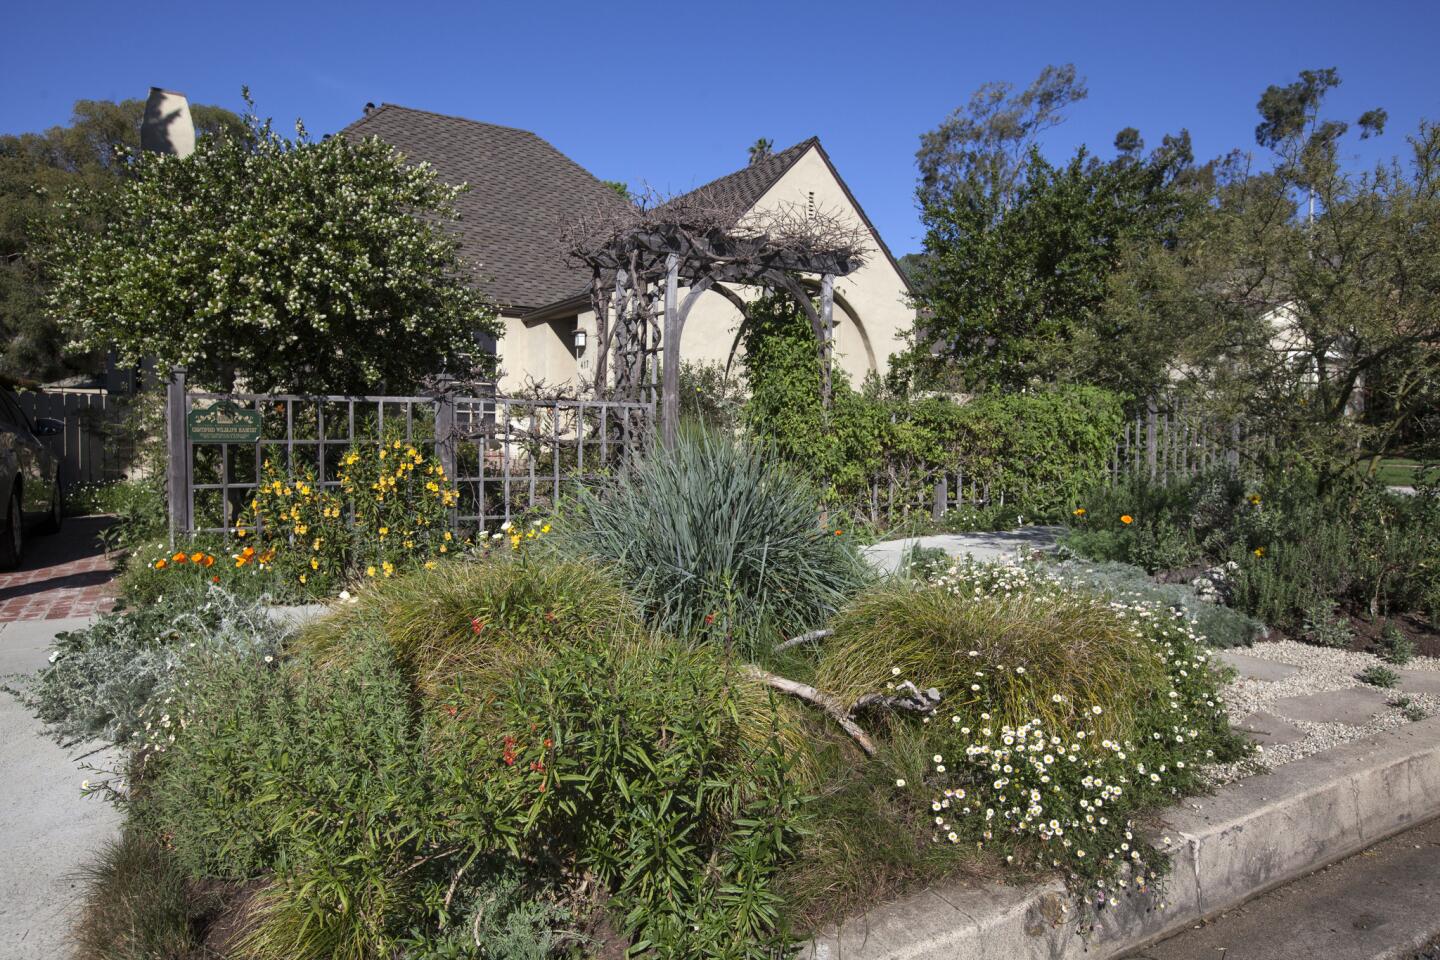 This 1,200-square-foot front garden in Brentwood is alive with birds, butterflies and bees thanks to the milkweed, lilac verbena, monkeyflower and buckwheat that were planted to attract wildlife. Begun in May 2008, it proves what you can do when you ditch the grass.